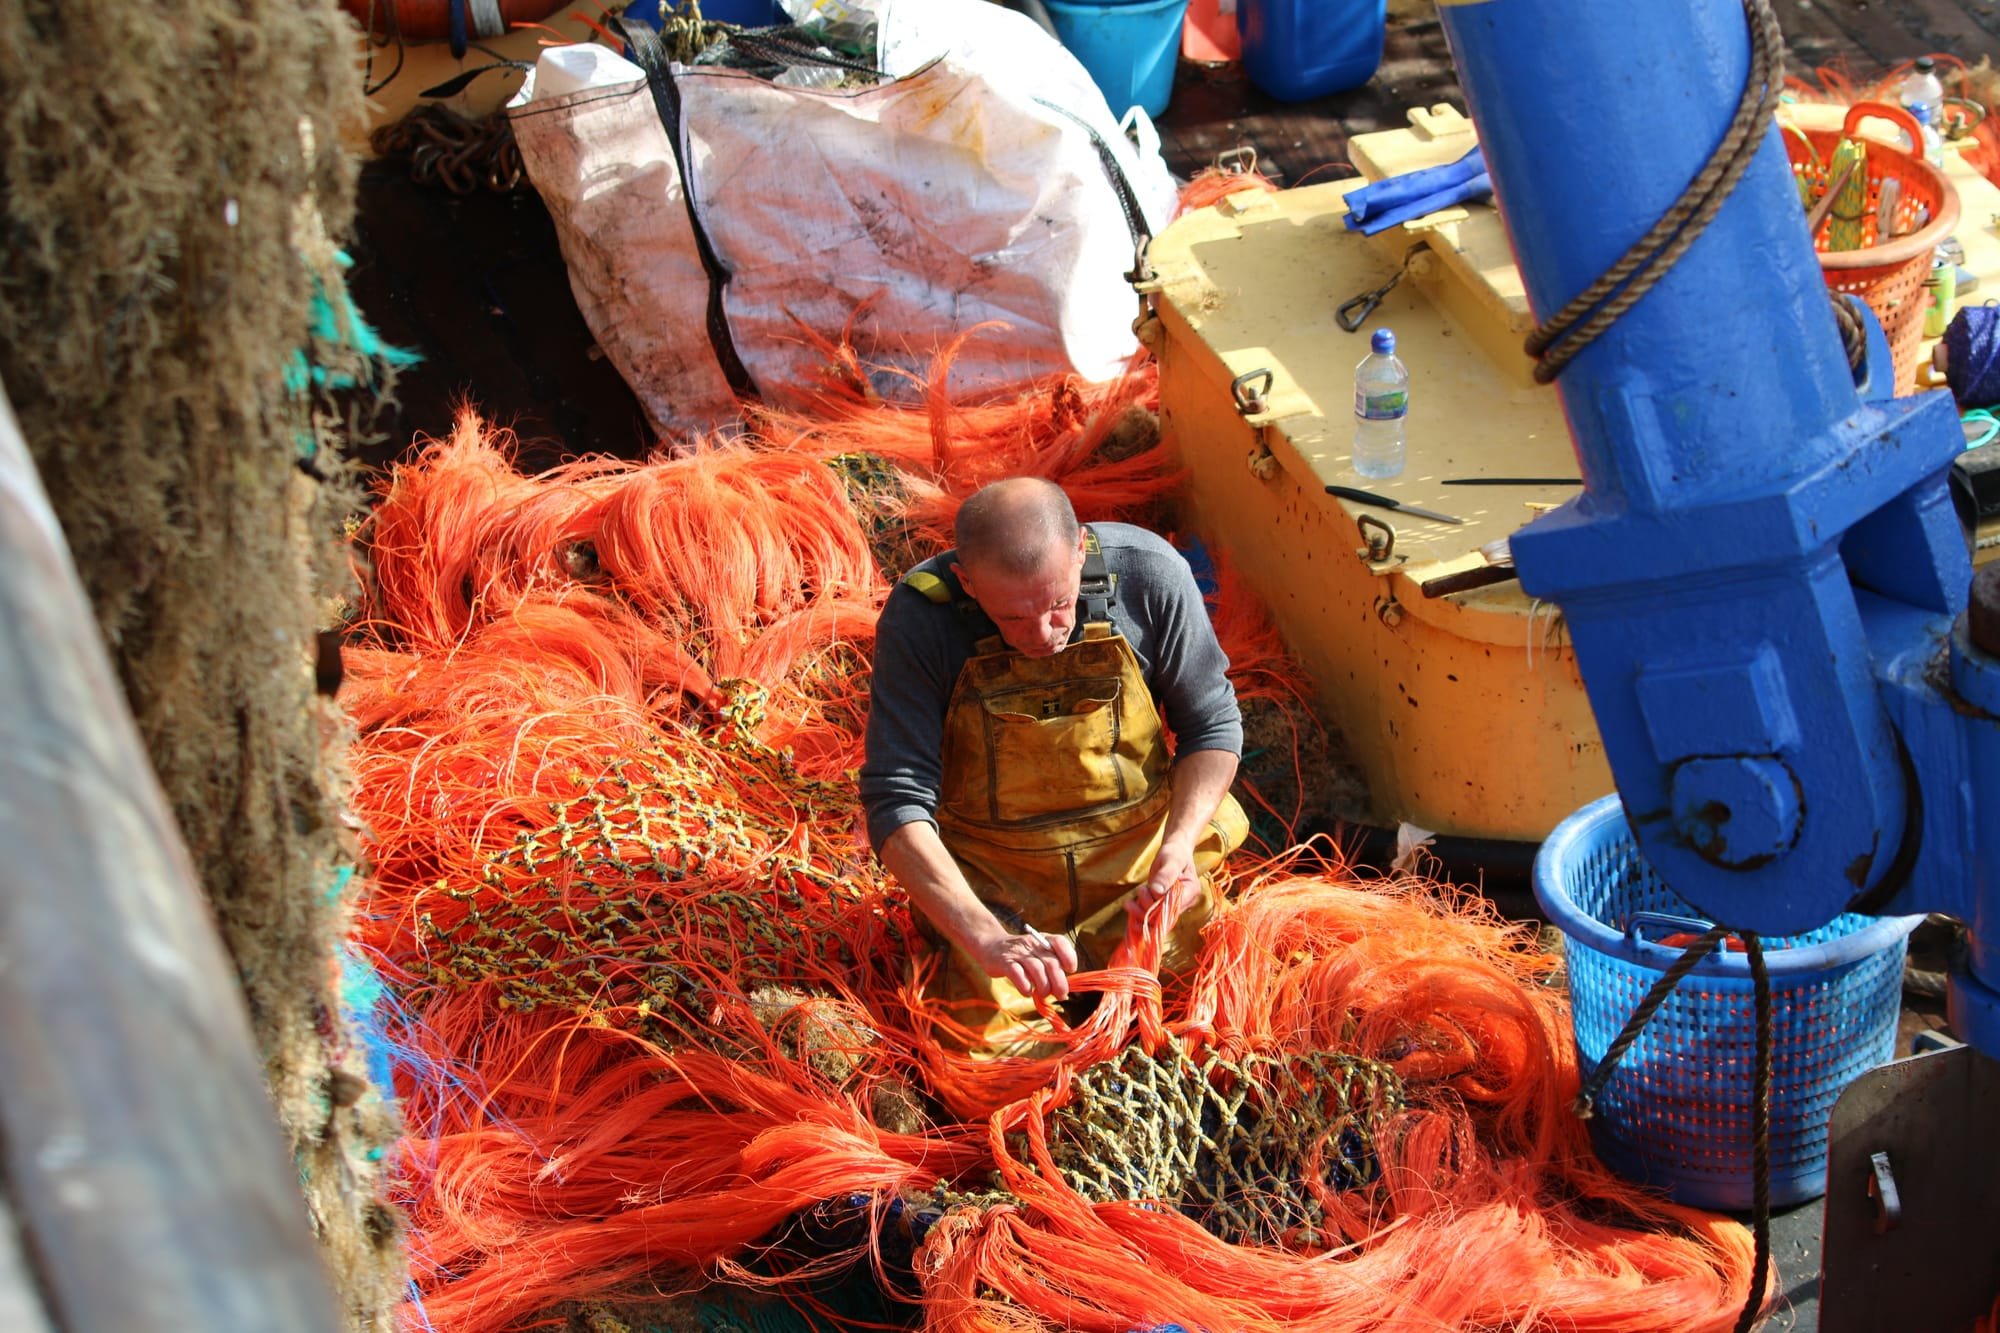 Industrial Injuries Disablement Benefit excluded for Fishermen